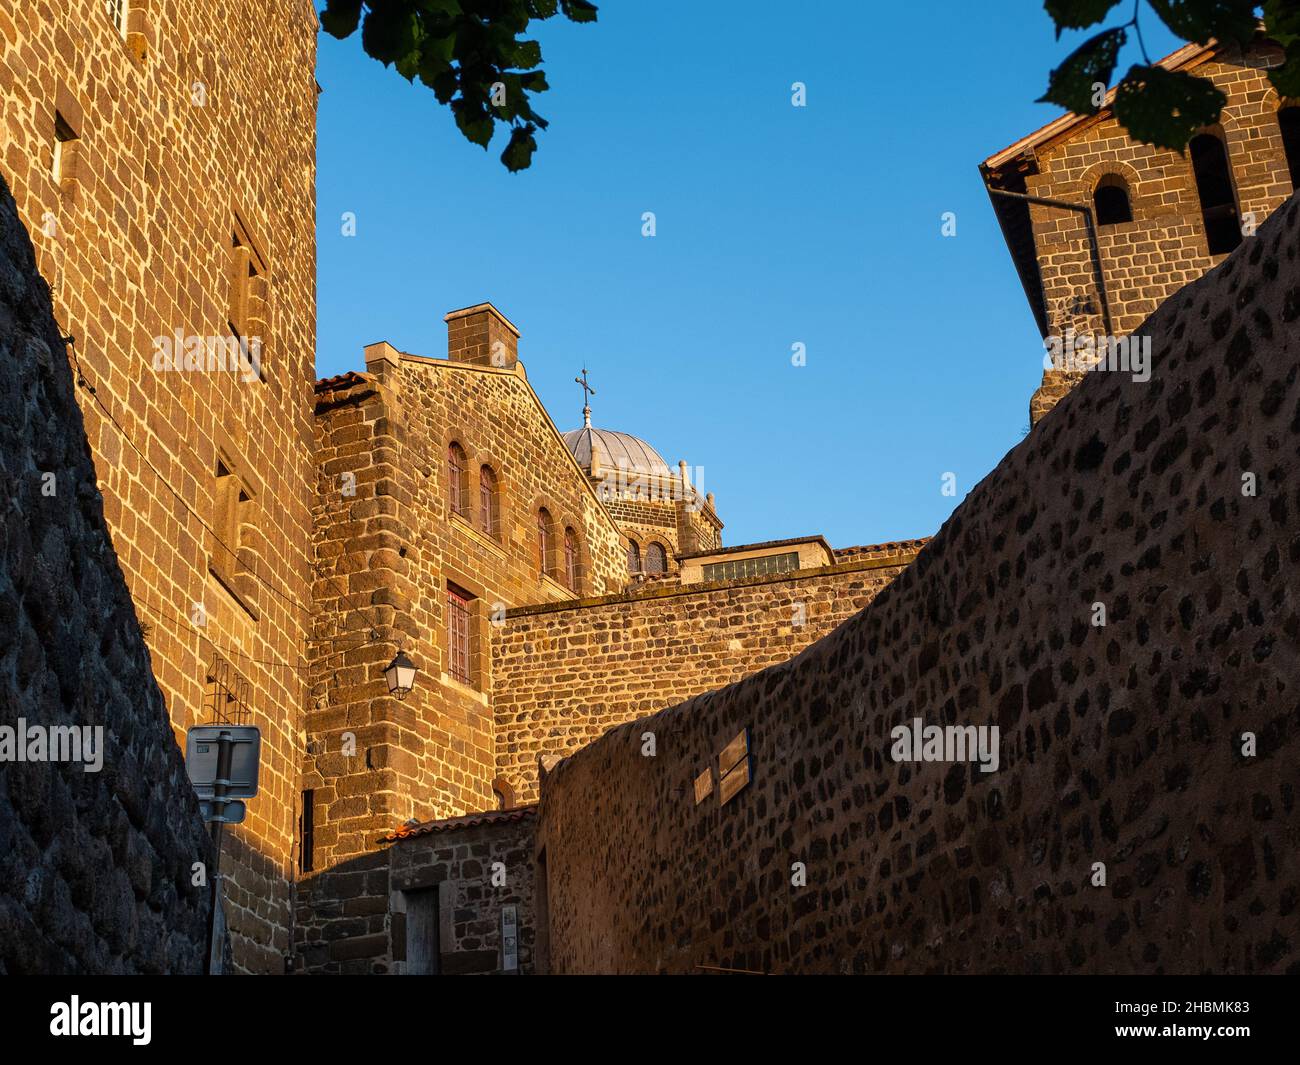 Volcanic stone walls and roofs of Le Puy-en-Velay cathedral, France , taken during the golden hours in the evening with no people Stock Photo